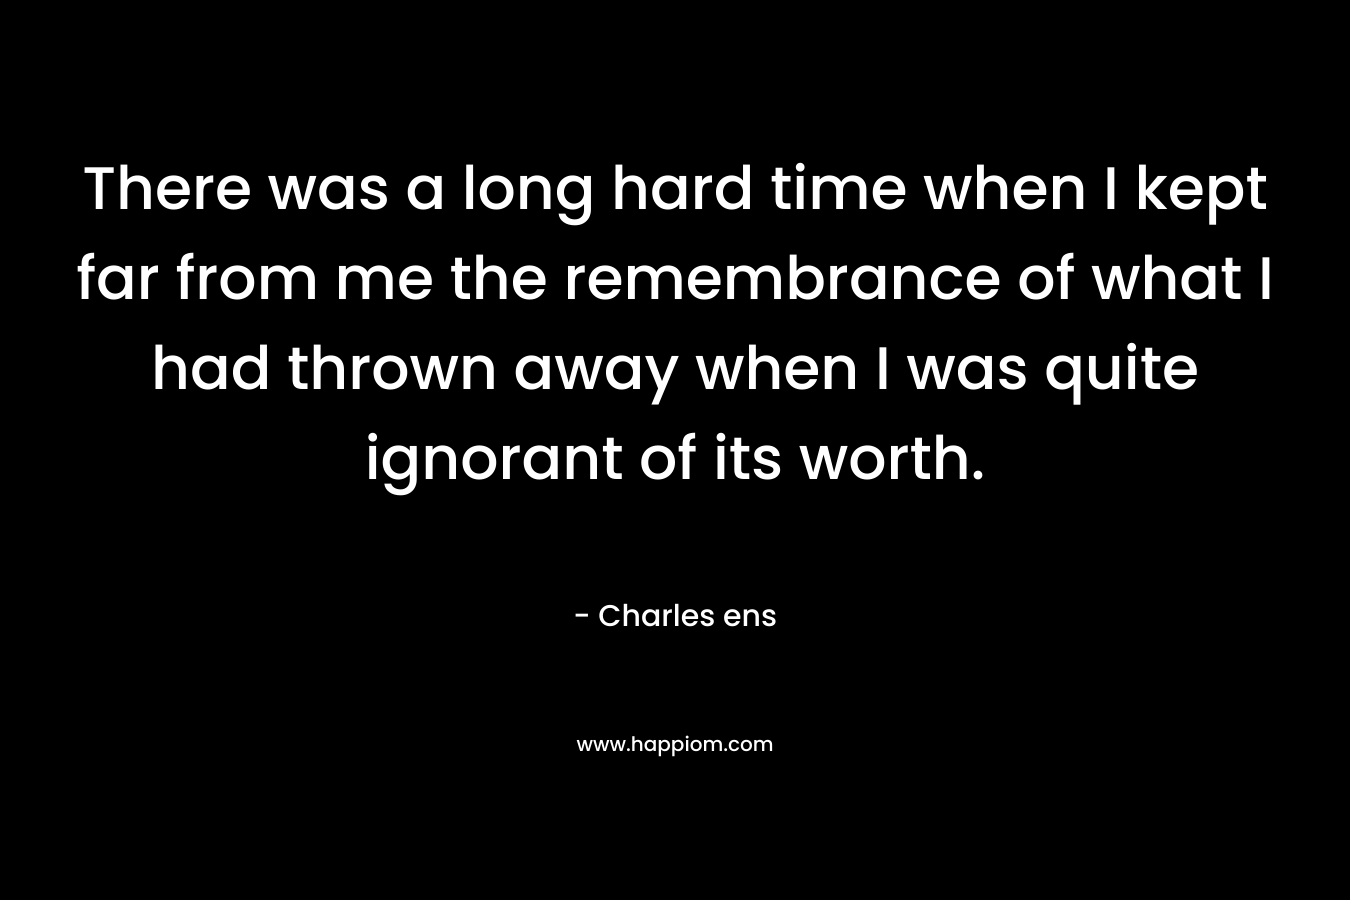 There was a long hard time when I kept far from me the remembrance of what I had thrown away when I was quite ignorant of its worth. – Charles ens